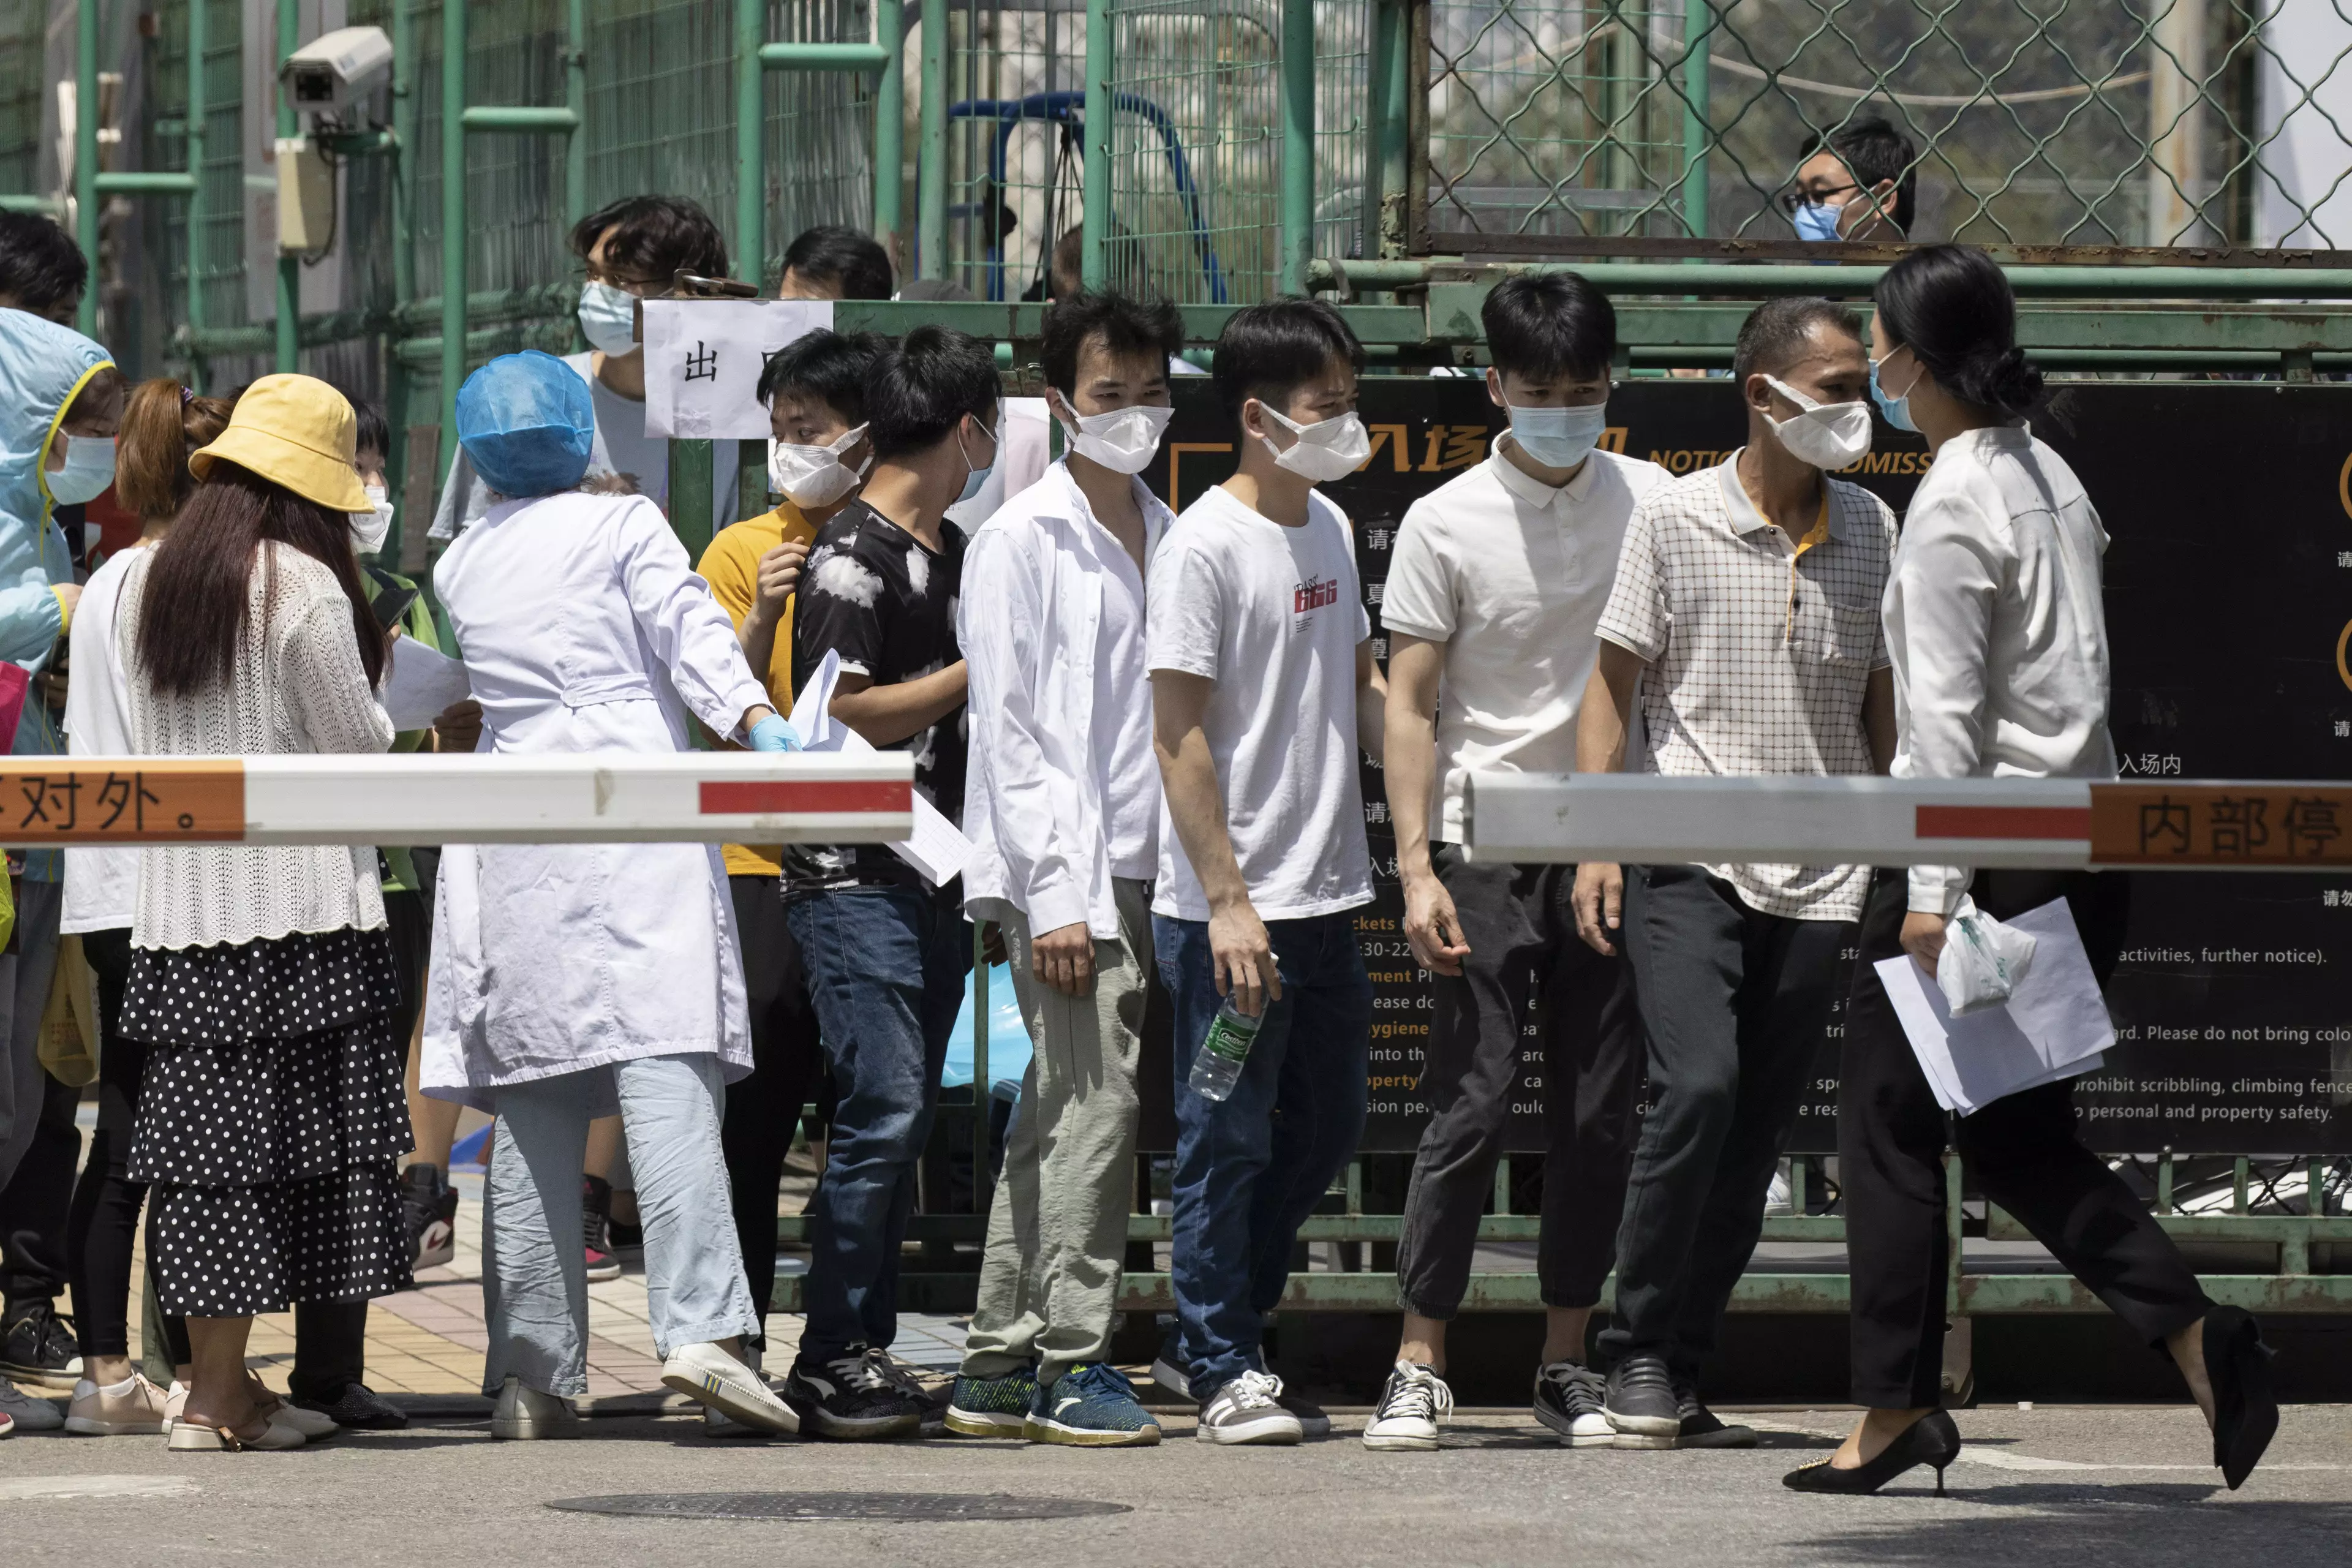 People queuing at a testing facility in Beijing.